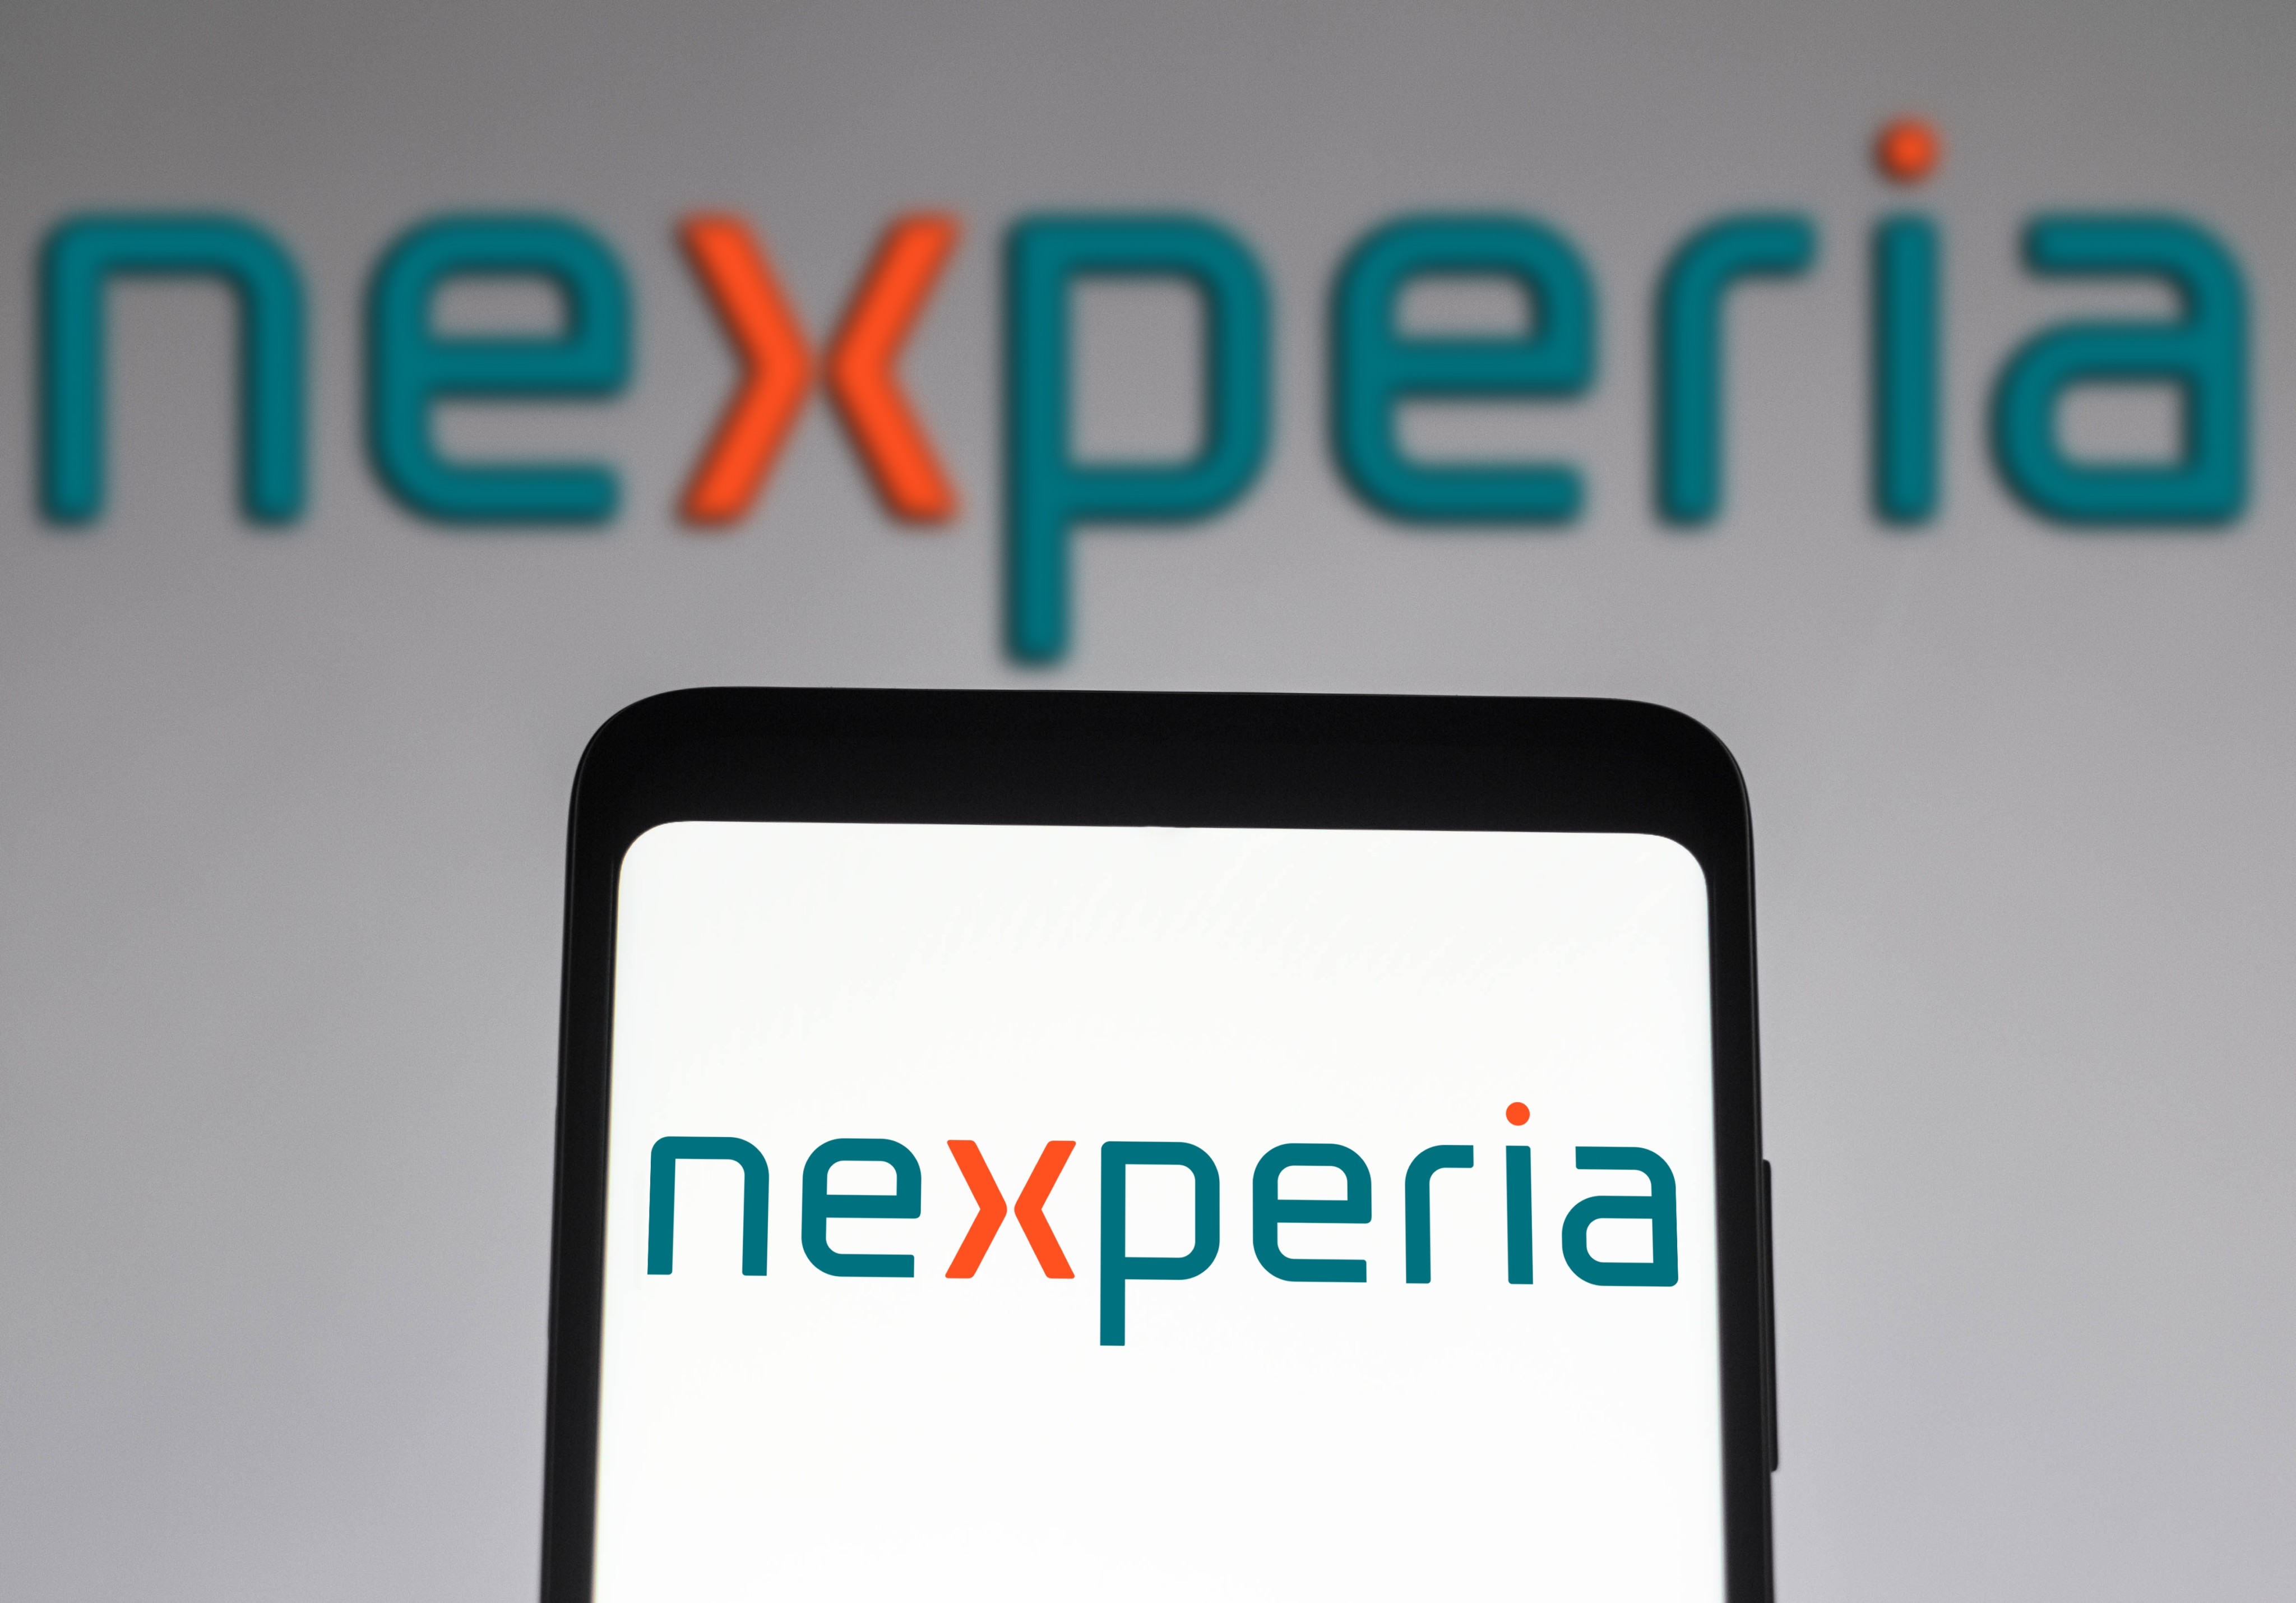 Nexperia was sold to Chinese investors in 2018, when it was acquired by Wingtech Technology Co. Photo: Shutterstock